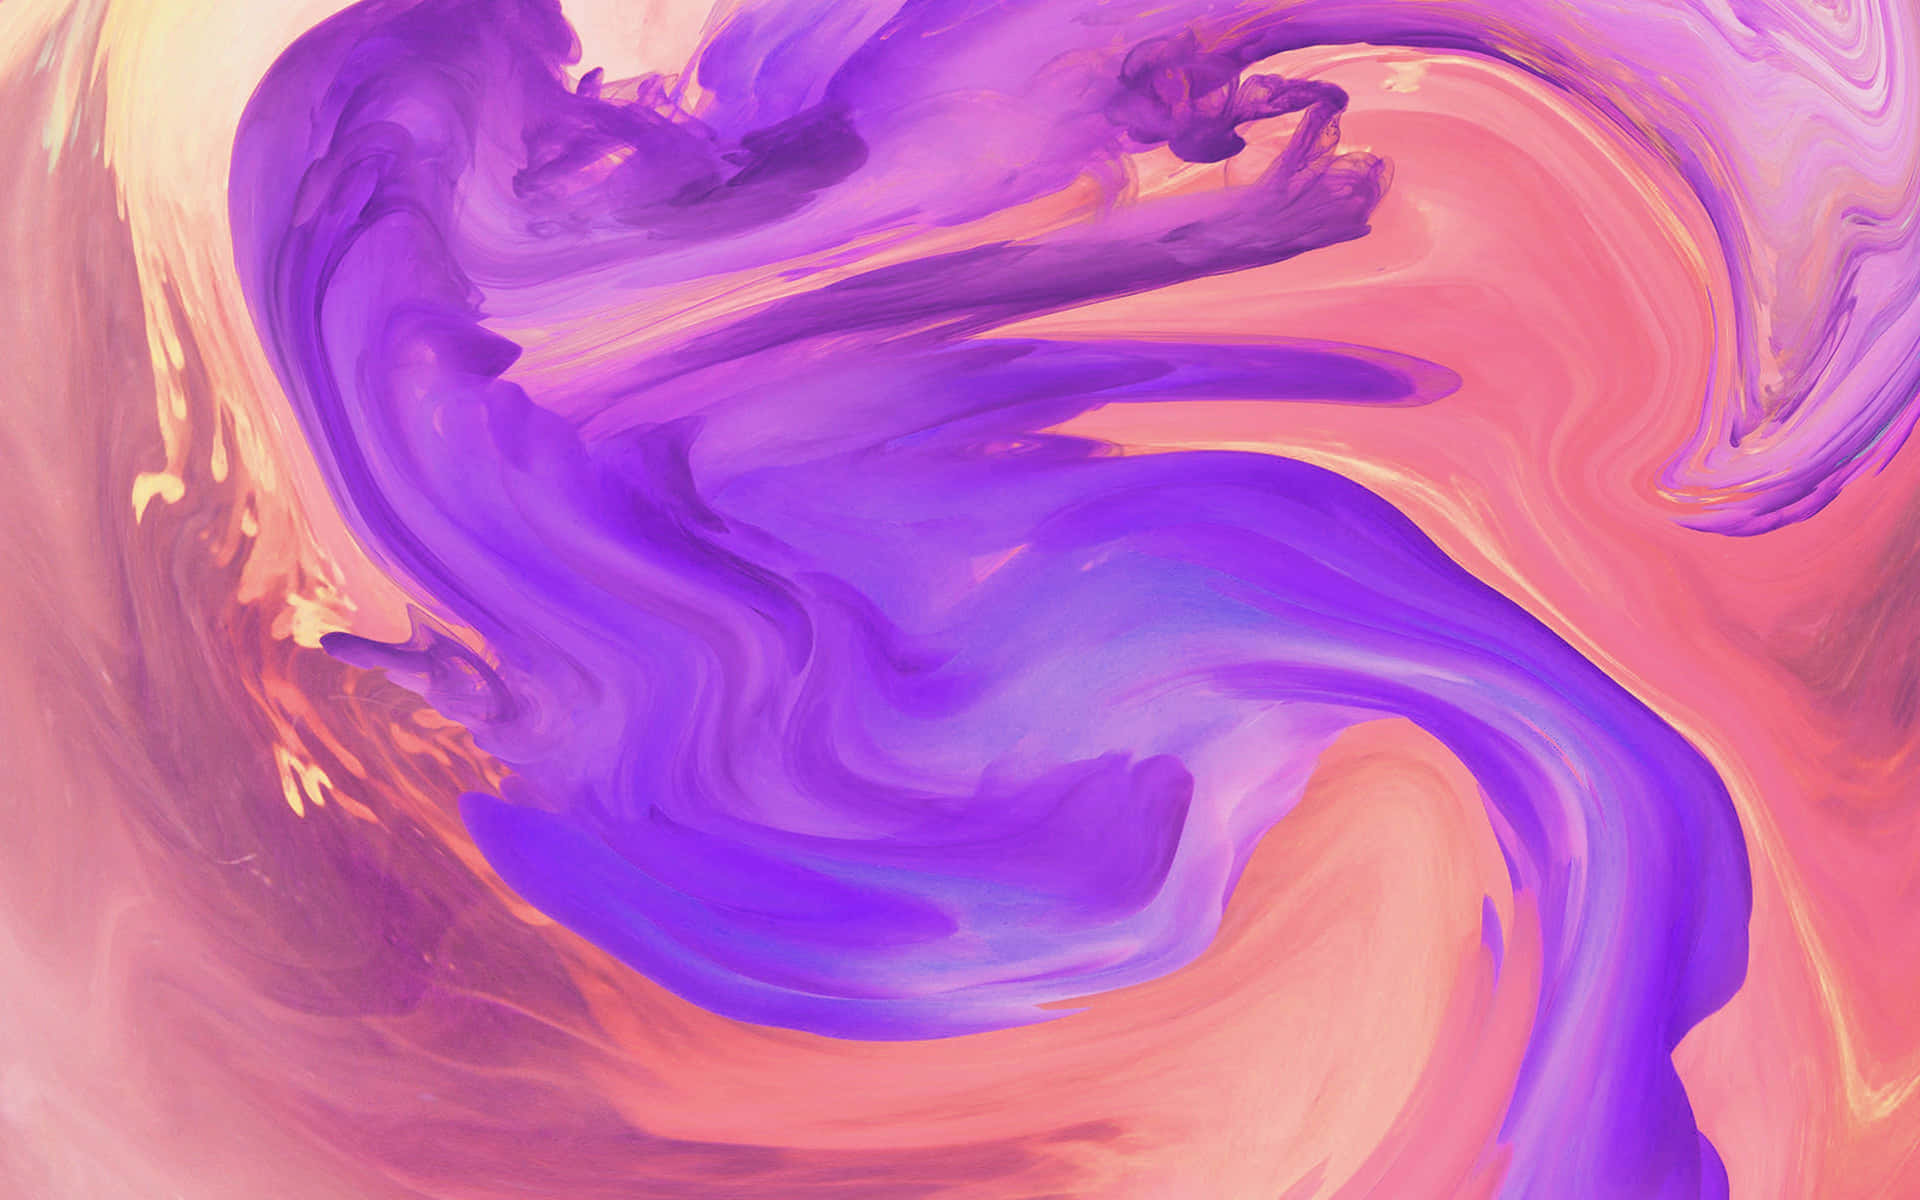 Get lost in the movement of our beautiful swirl! Wallpaper